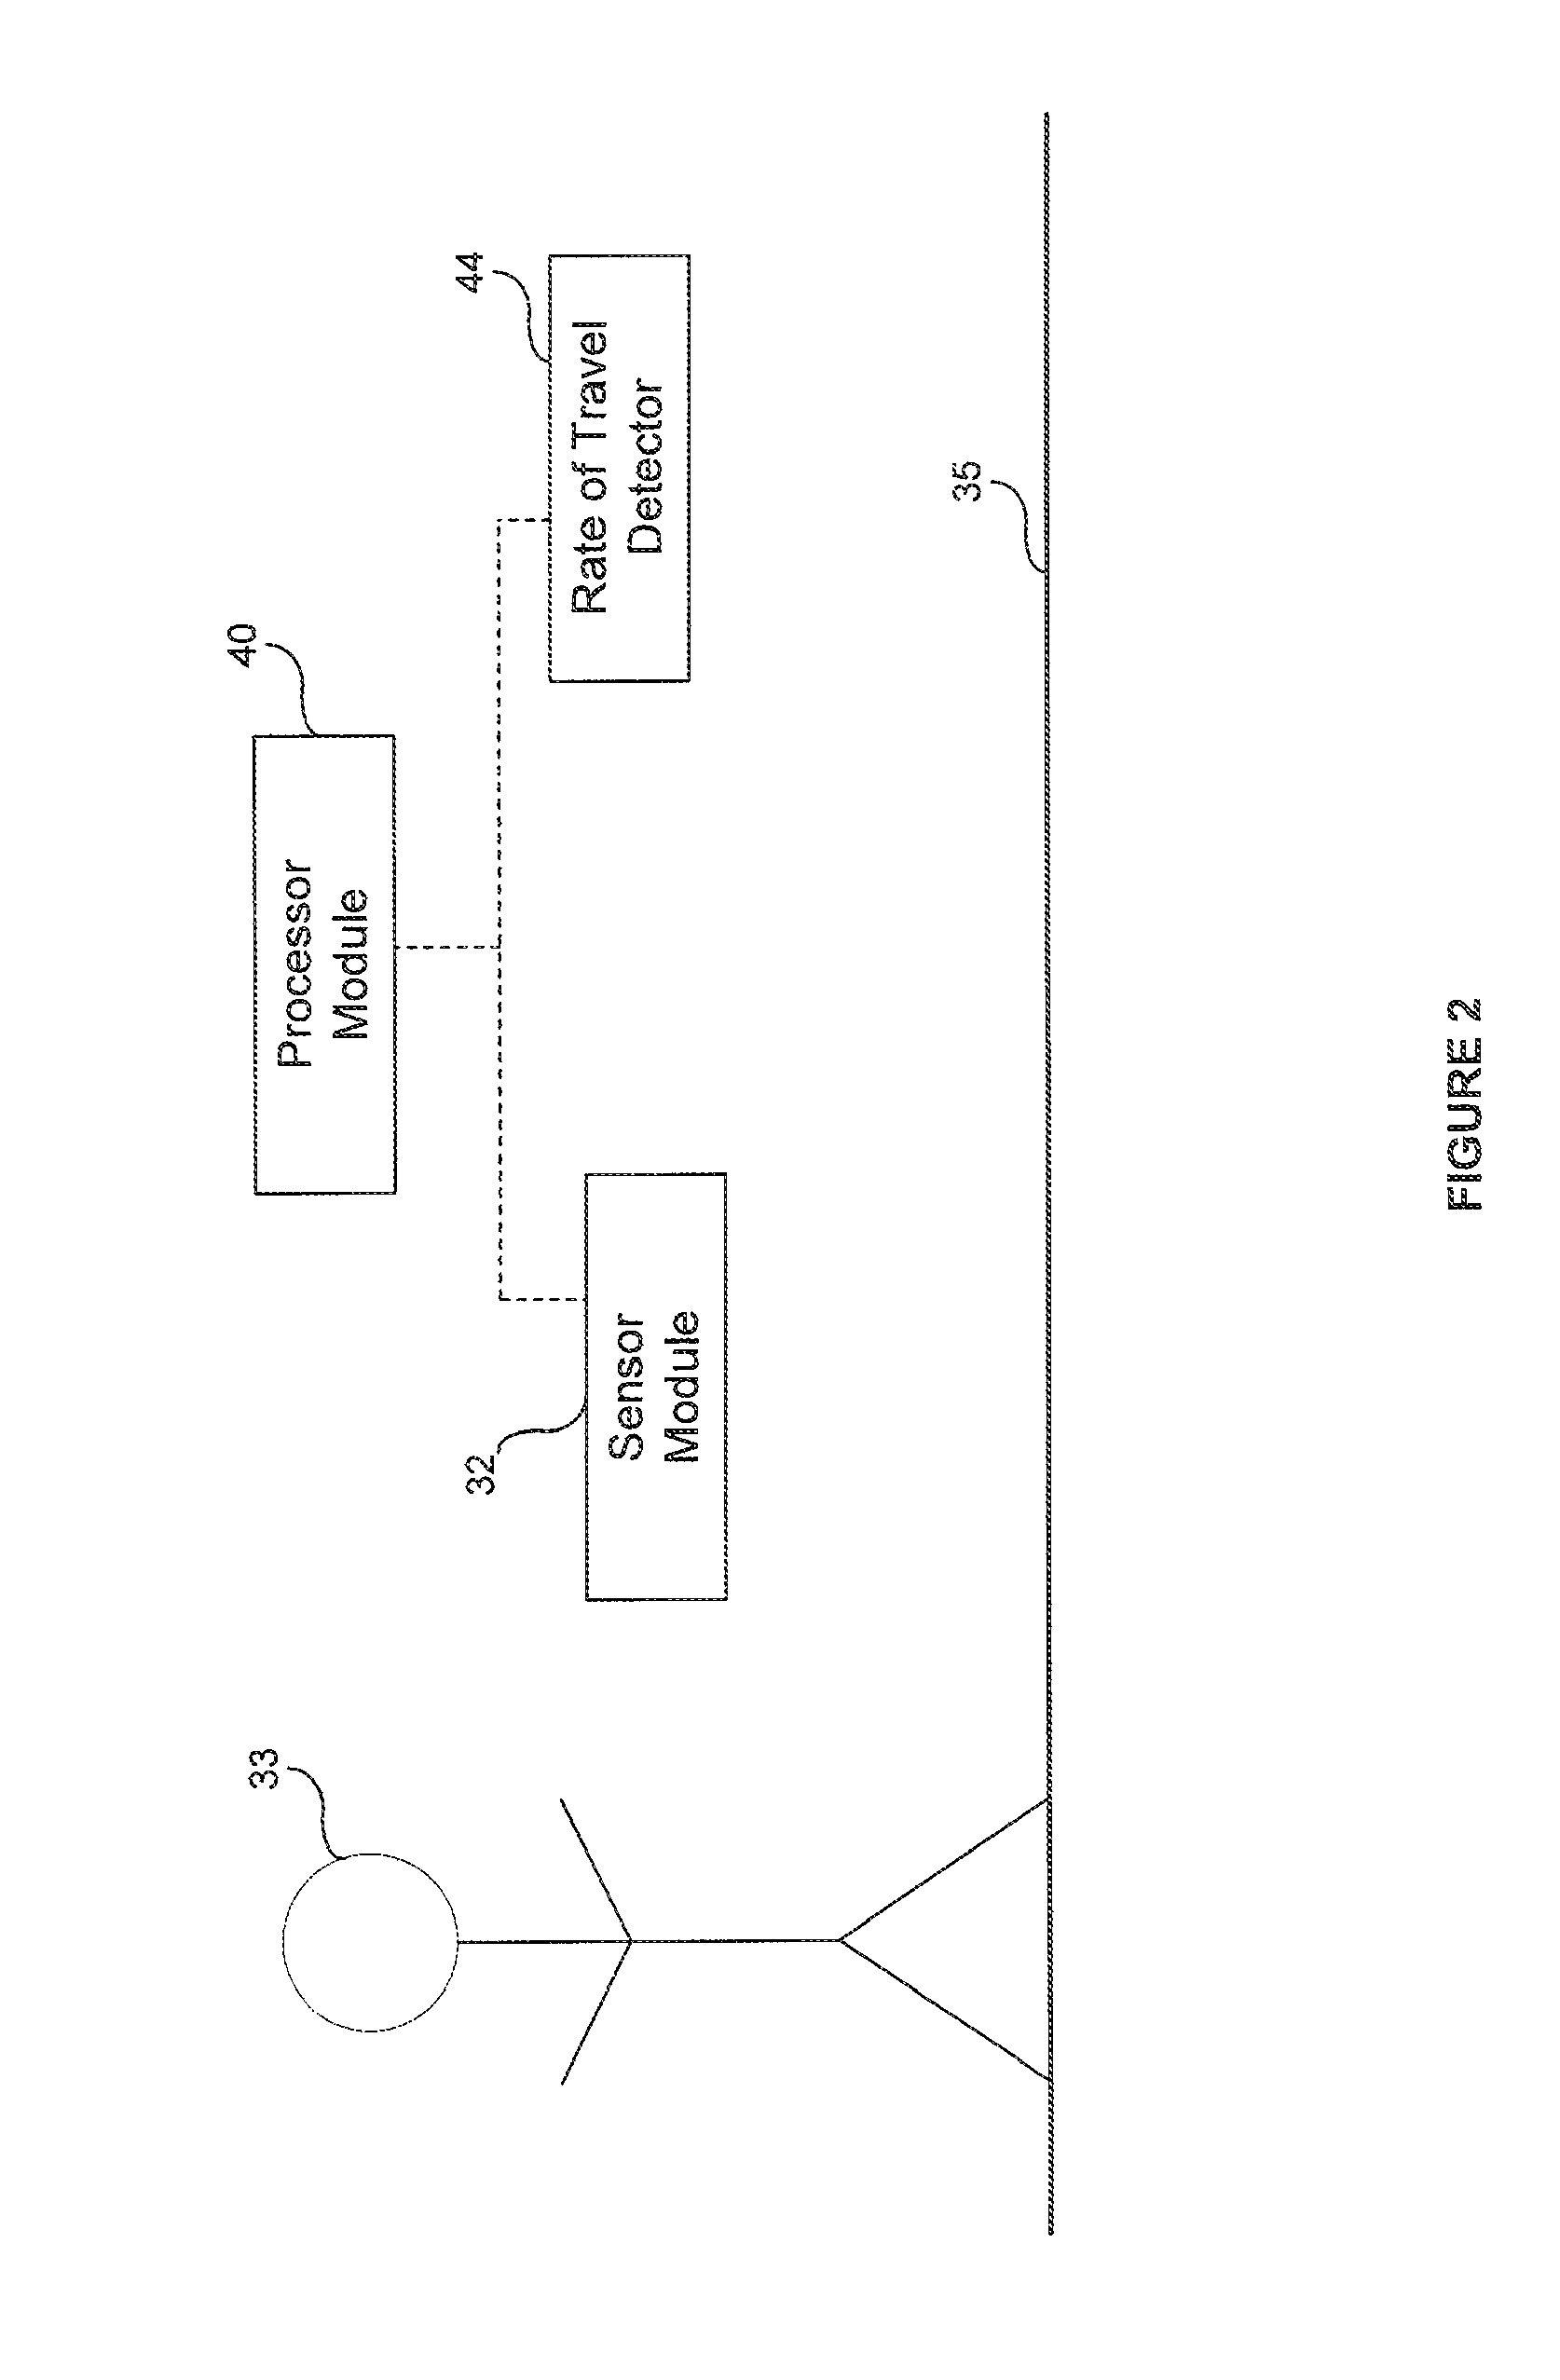 Method and system for the derivation of human gait characteristics and detecting falls passively from floor vibrations